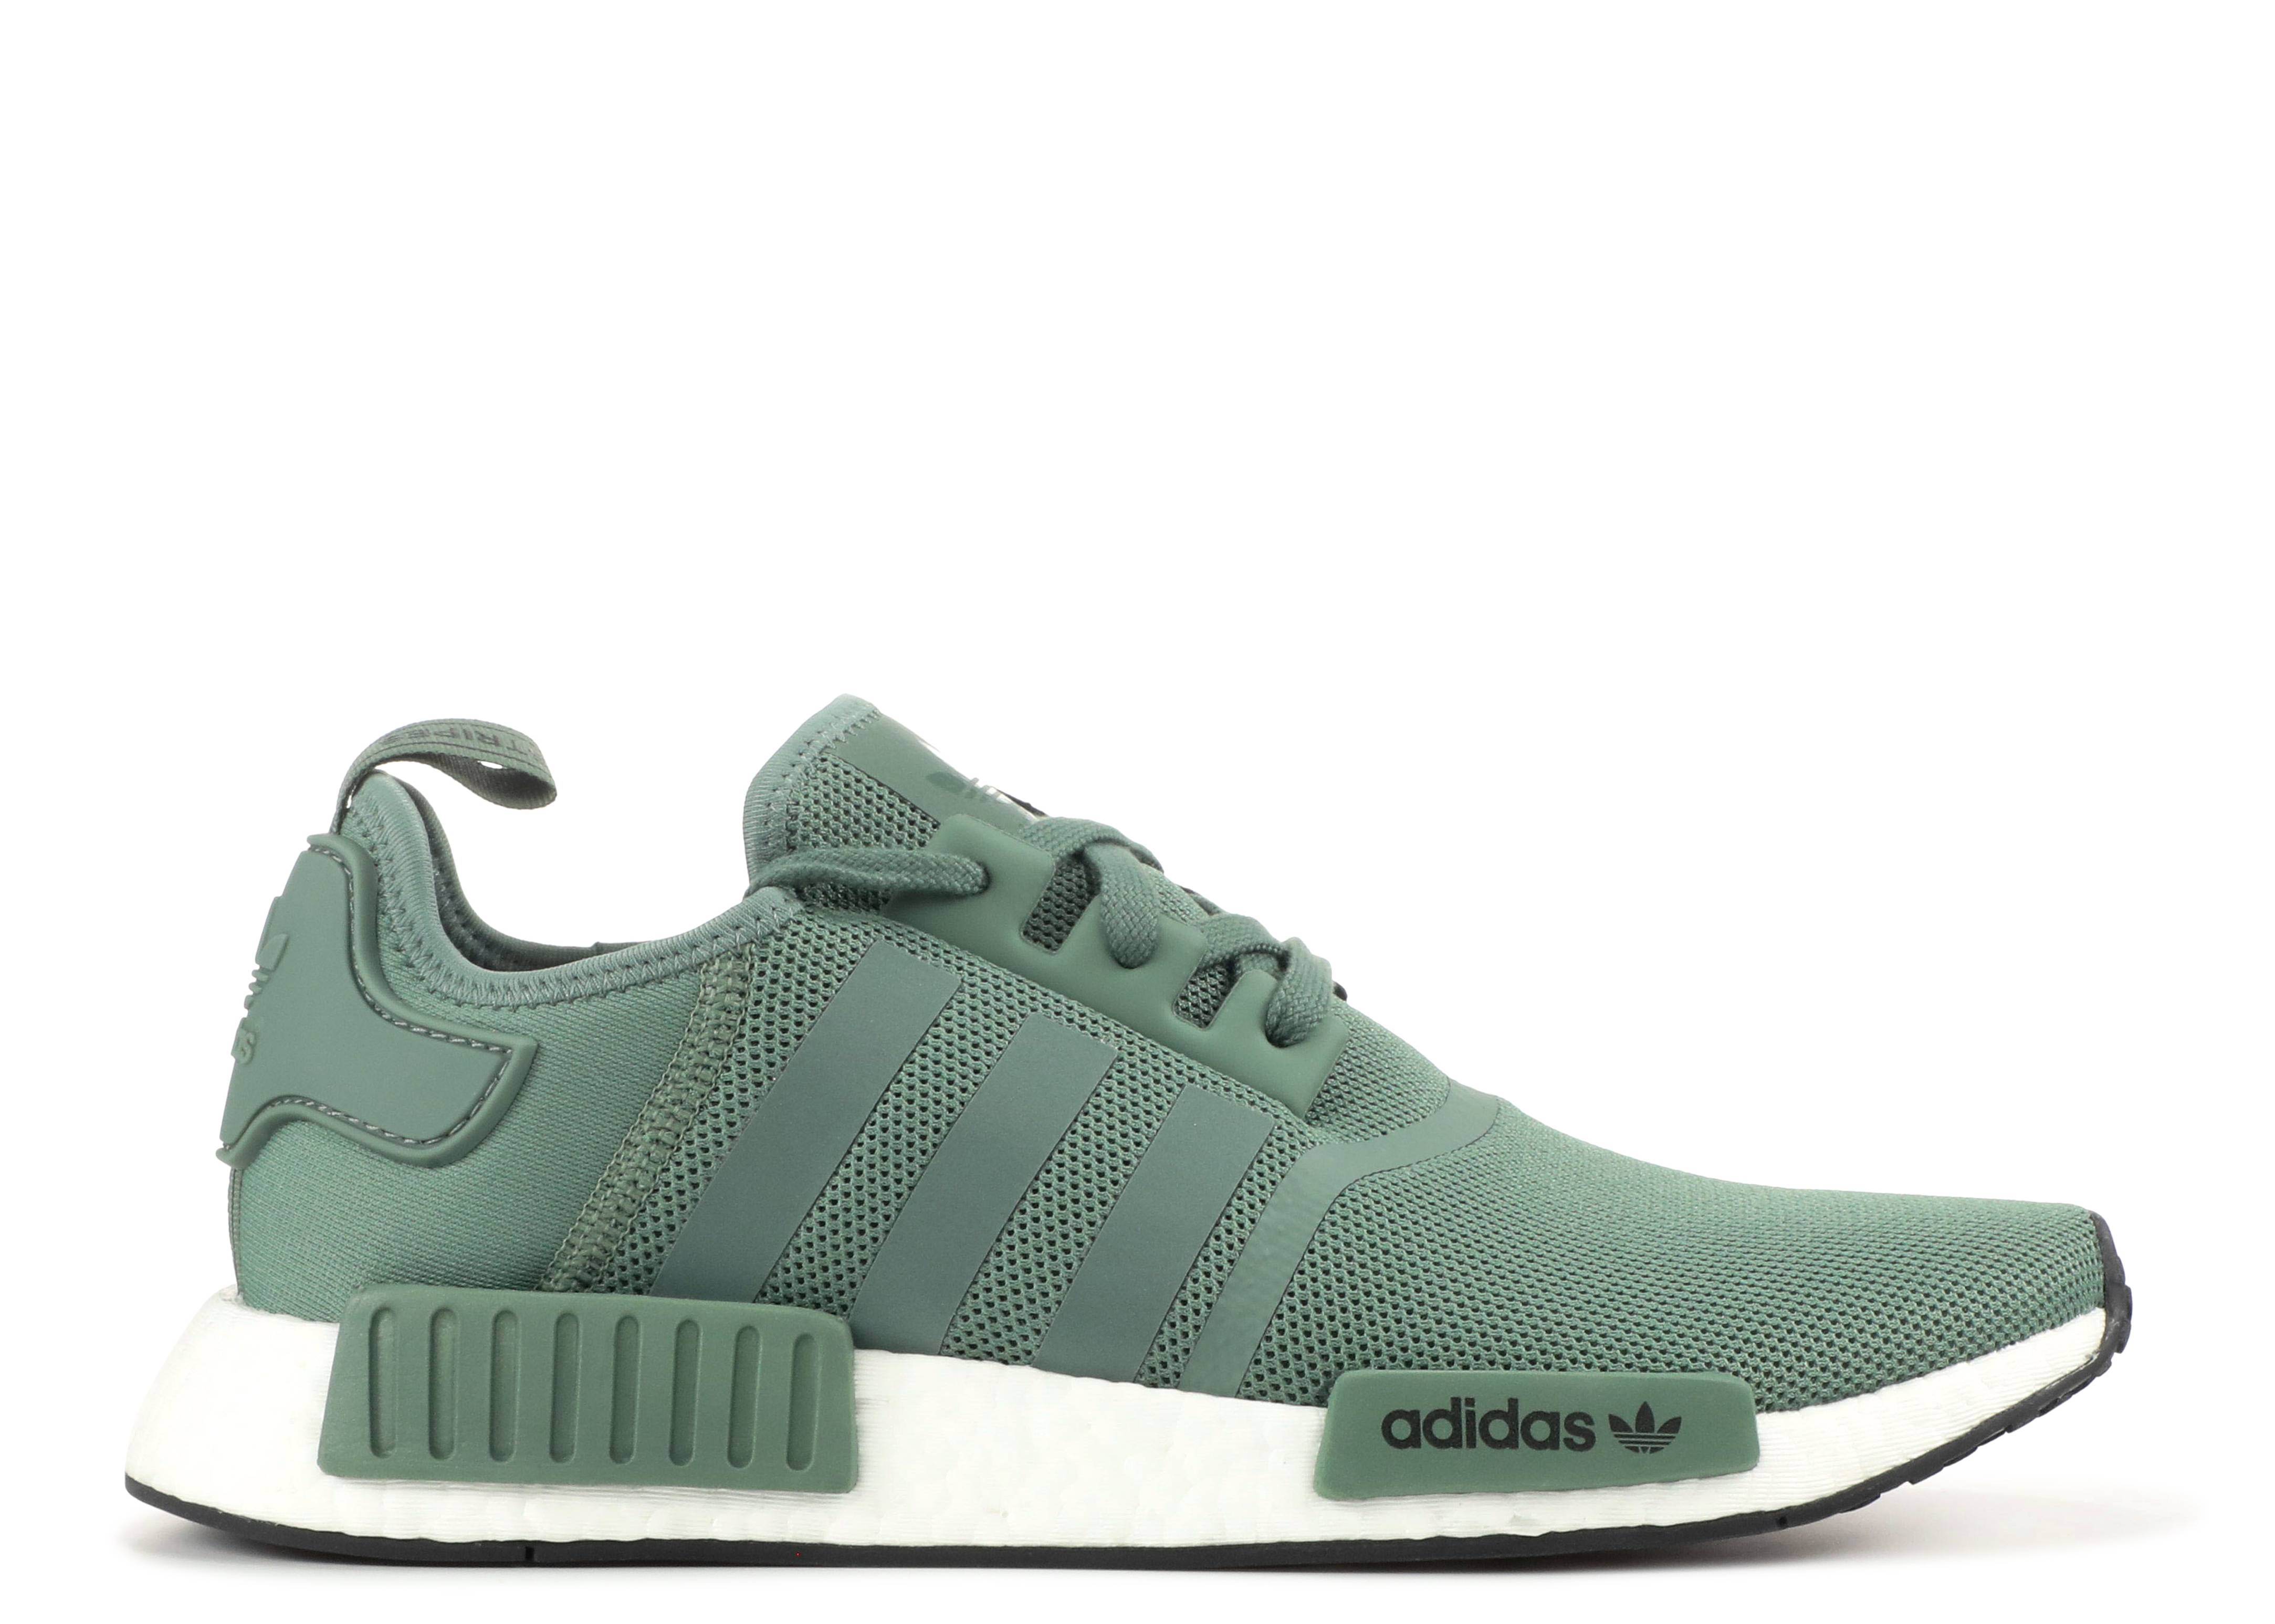 NMD_R1 'Trace Green'